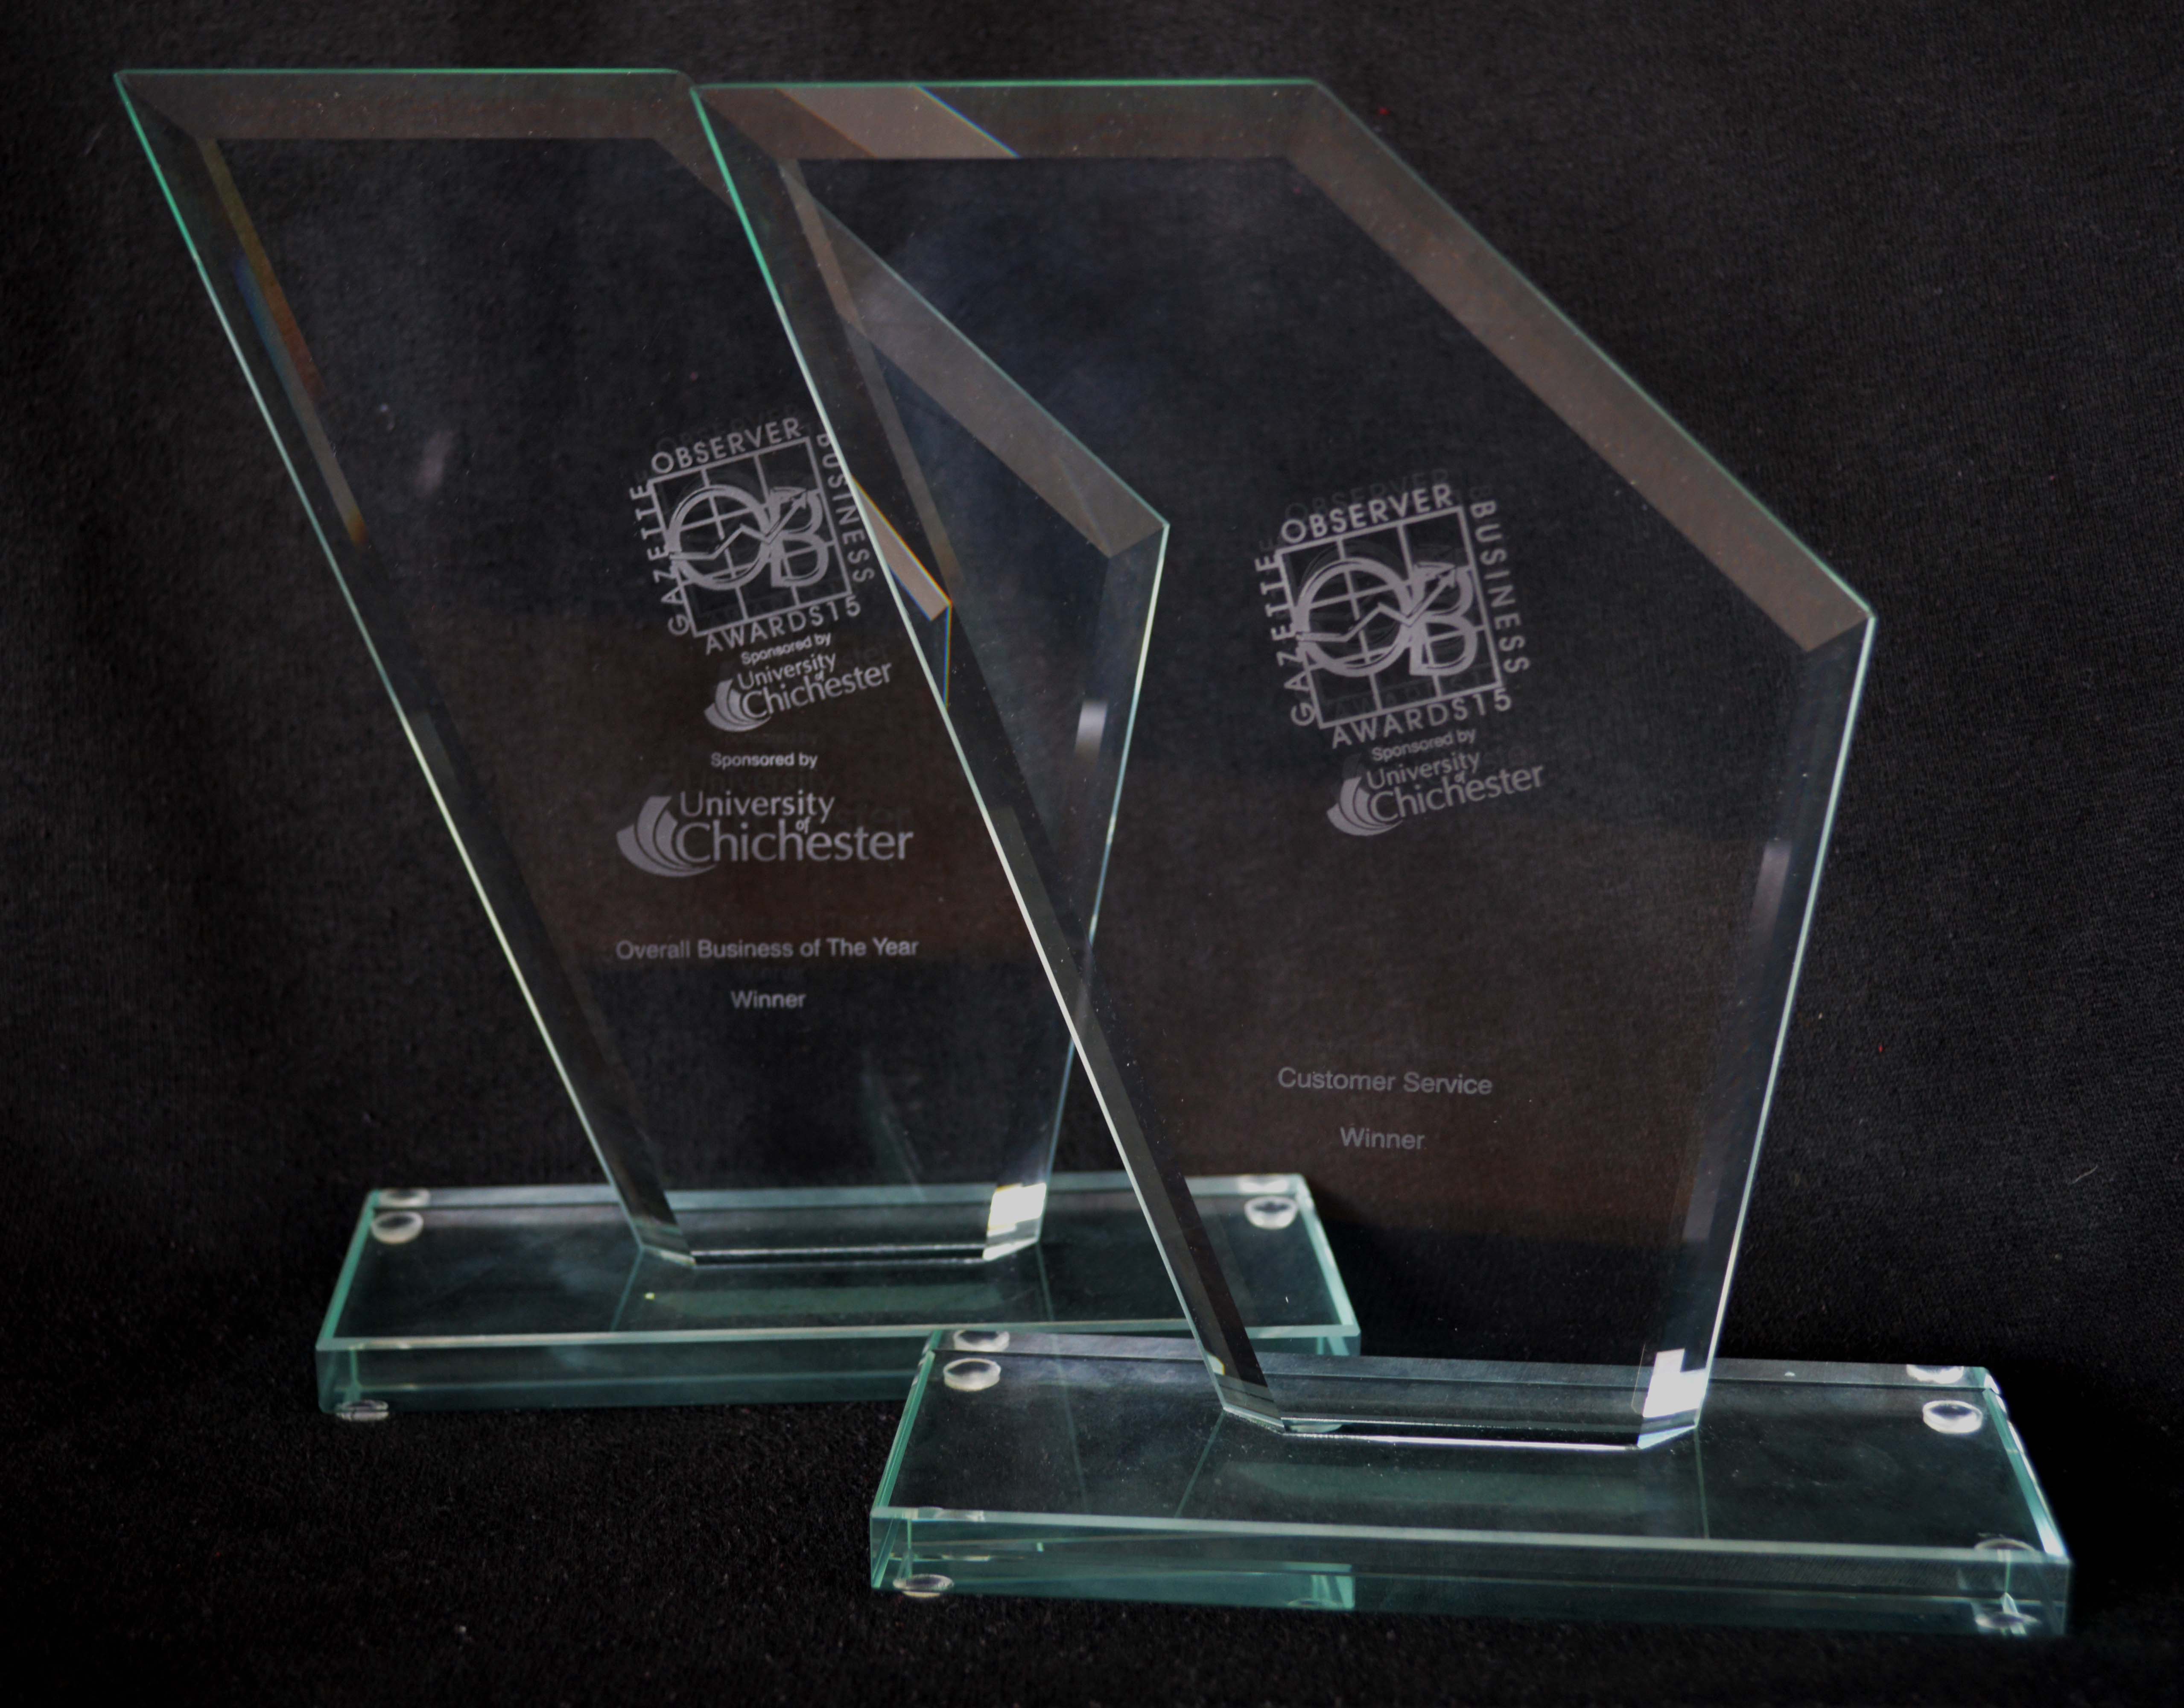 The two awards from the evening for 'Customer Service' and 'Business of the Year'